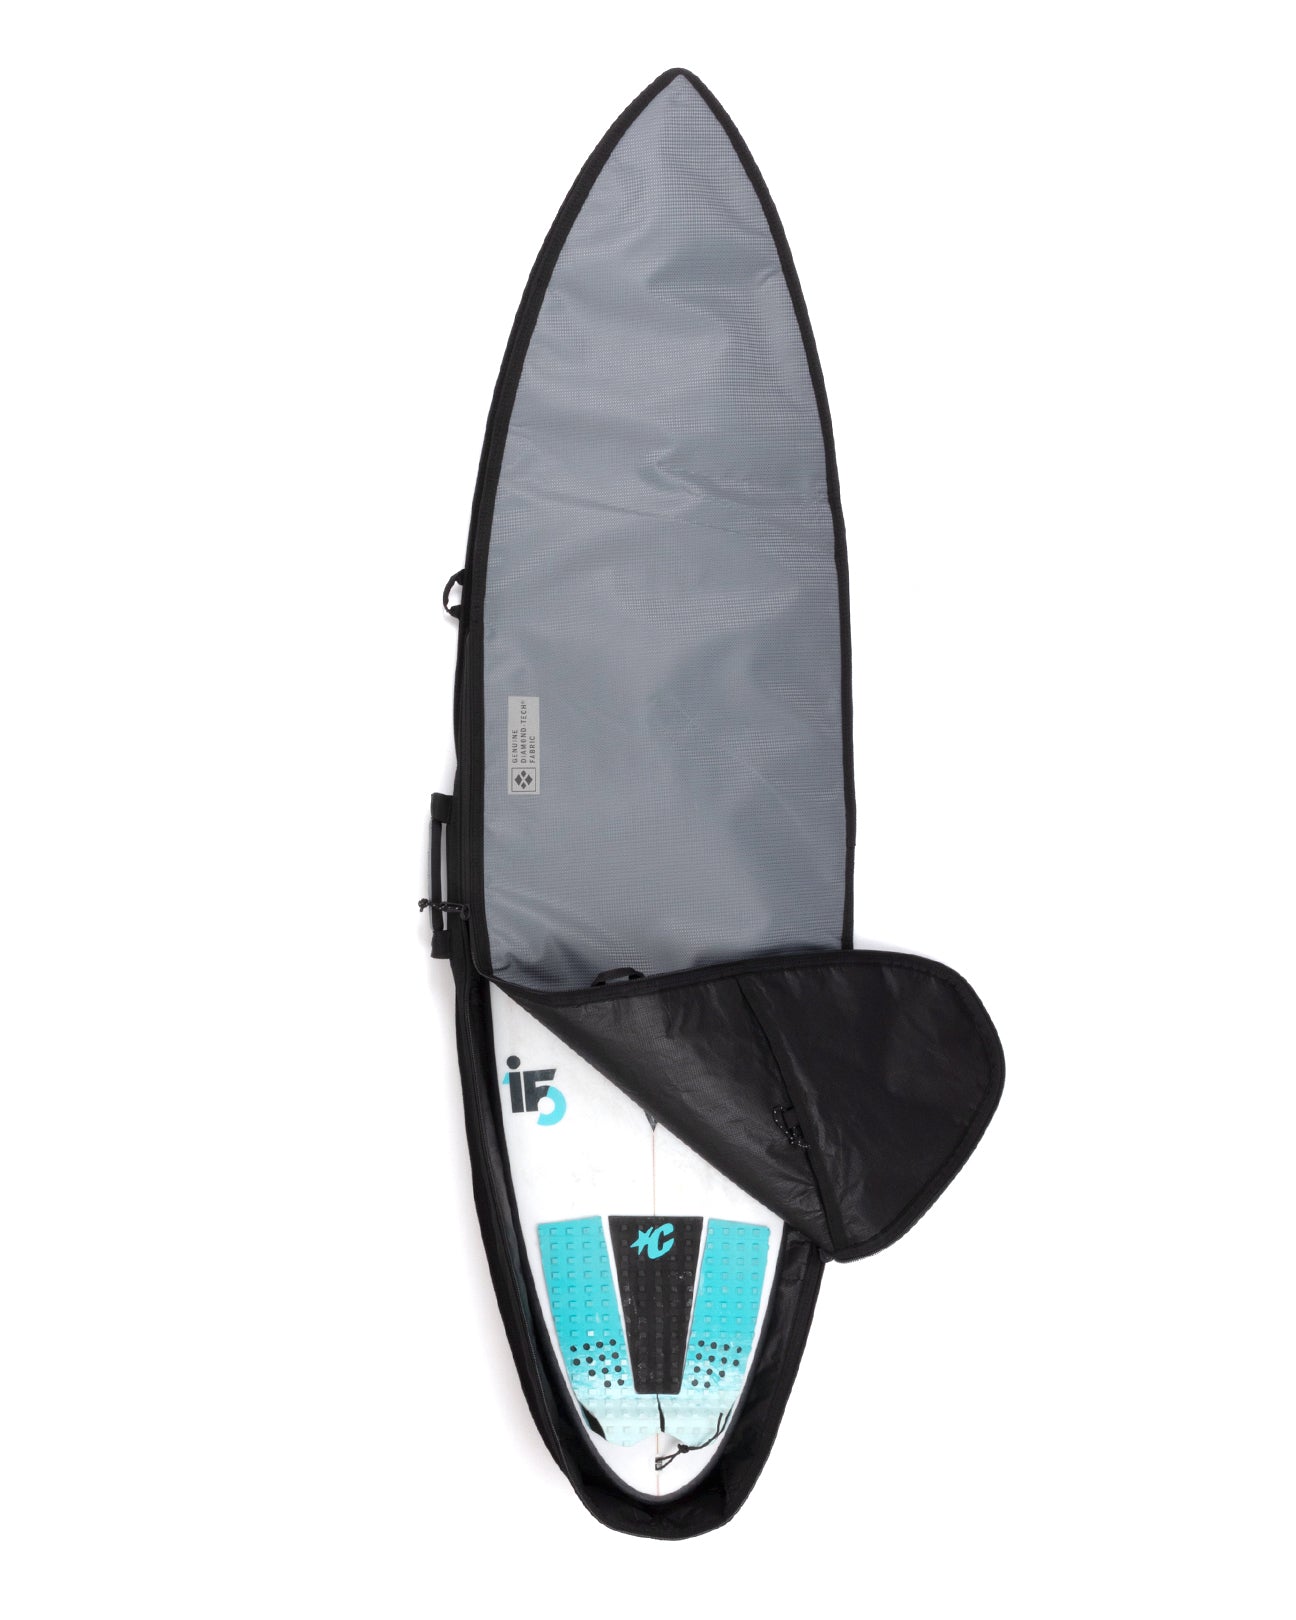 SHORTBOARD DAY USE DT2.0